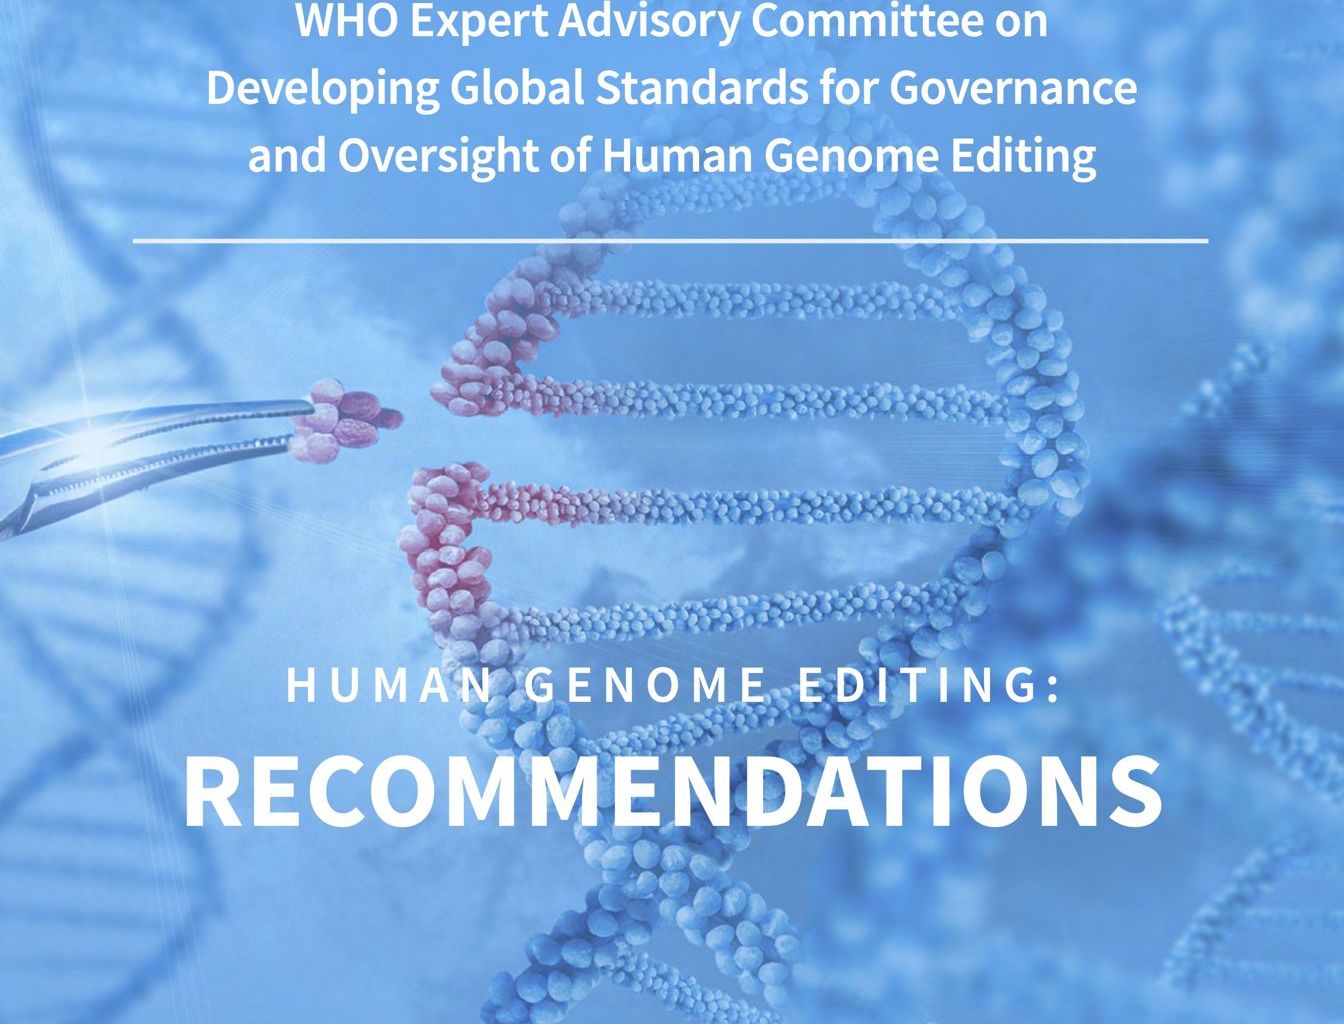 Human genome editing: recommendations